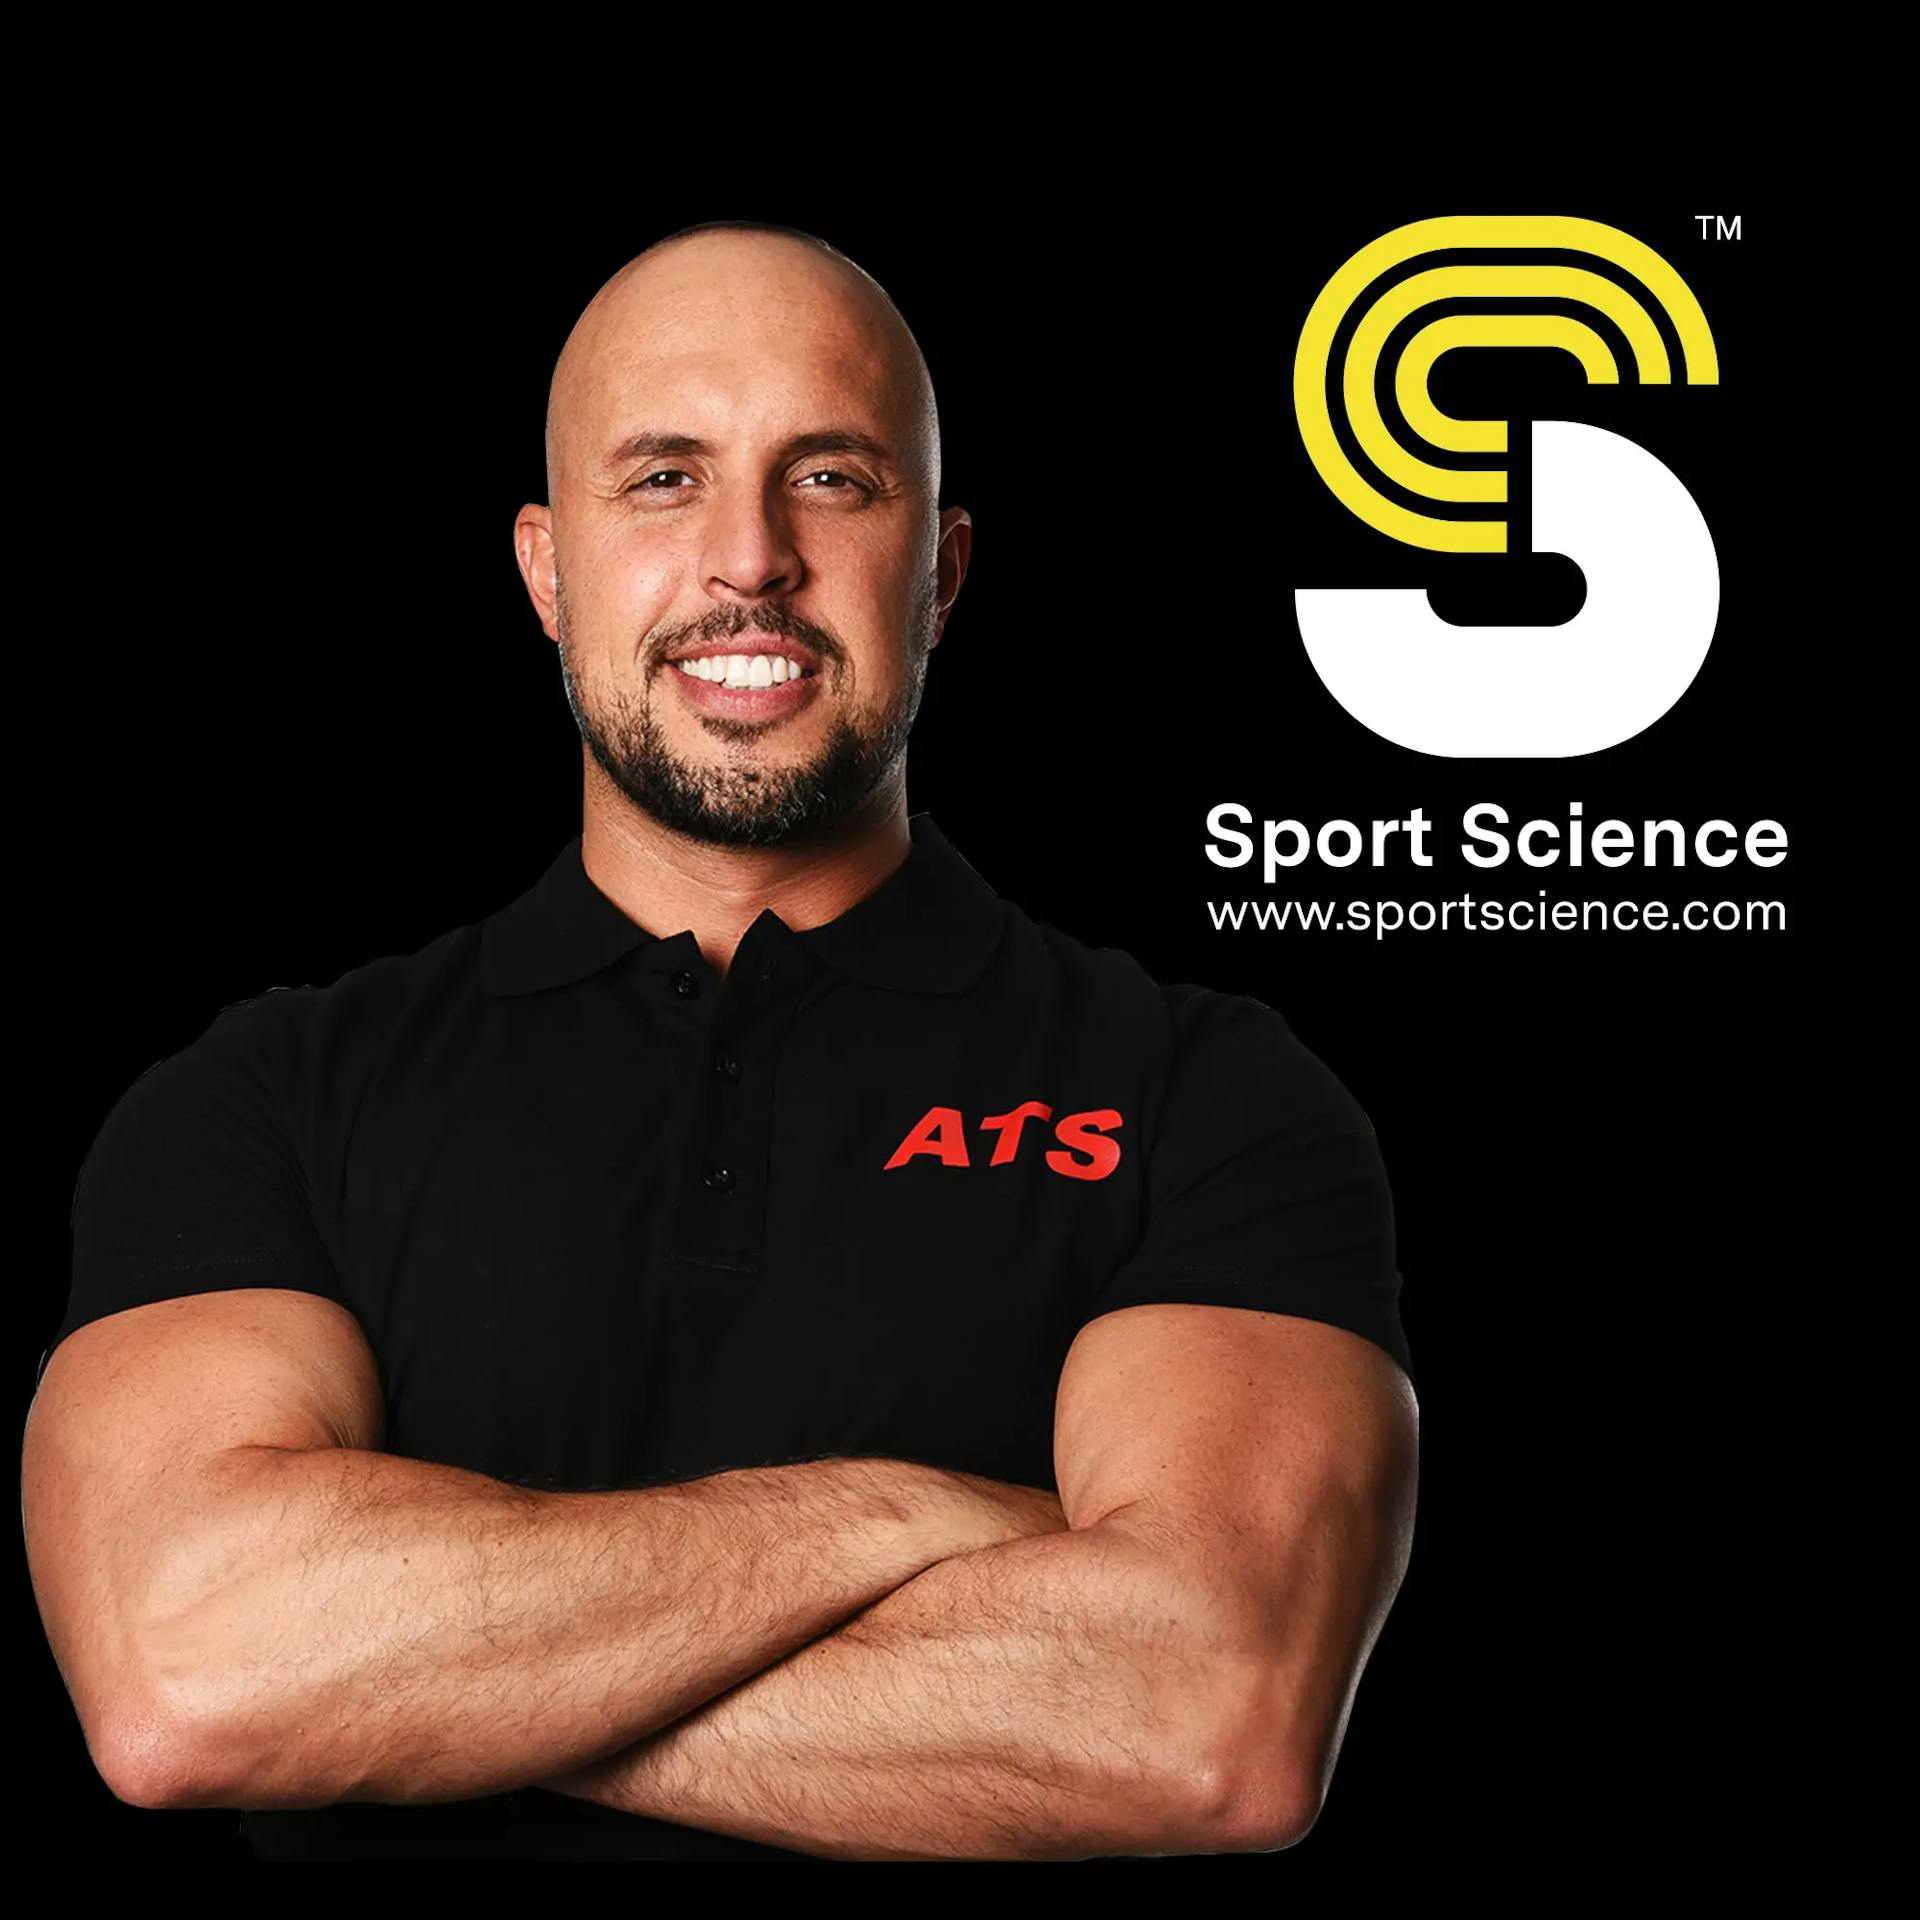 Sport Science is a collaboration between ATS Institute and Scienze Motorie